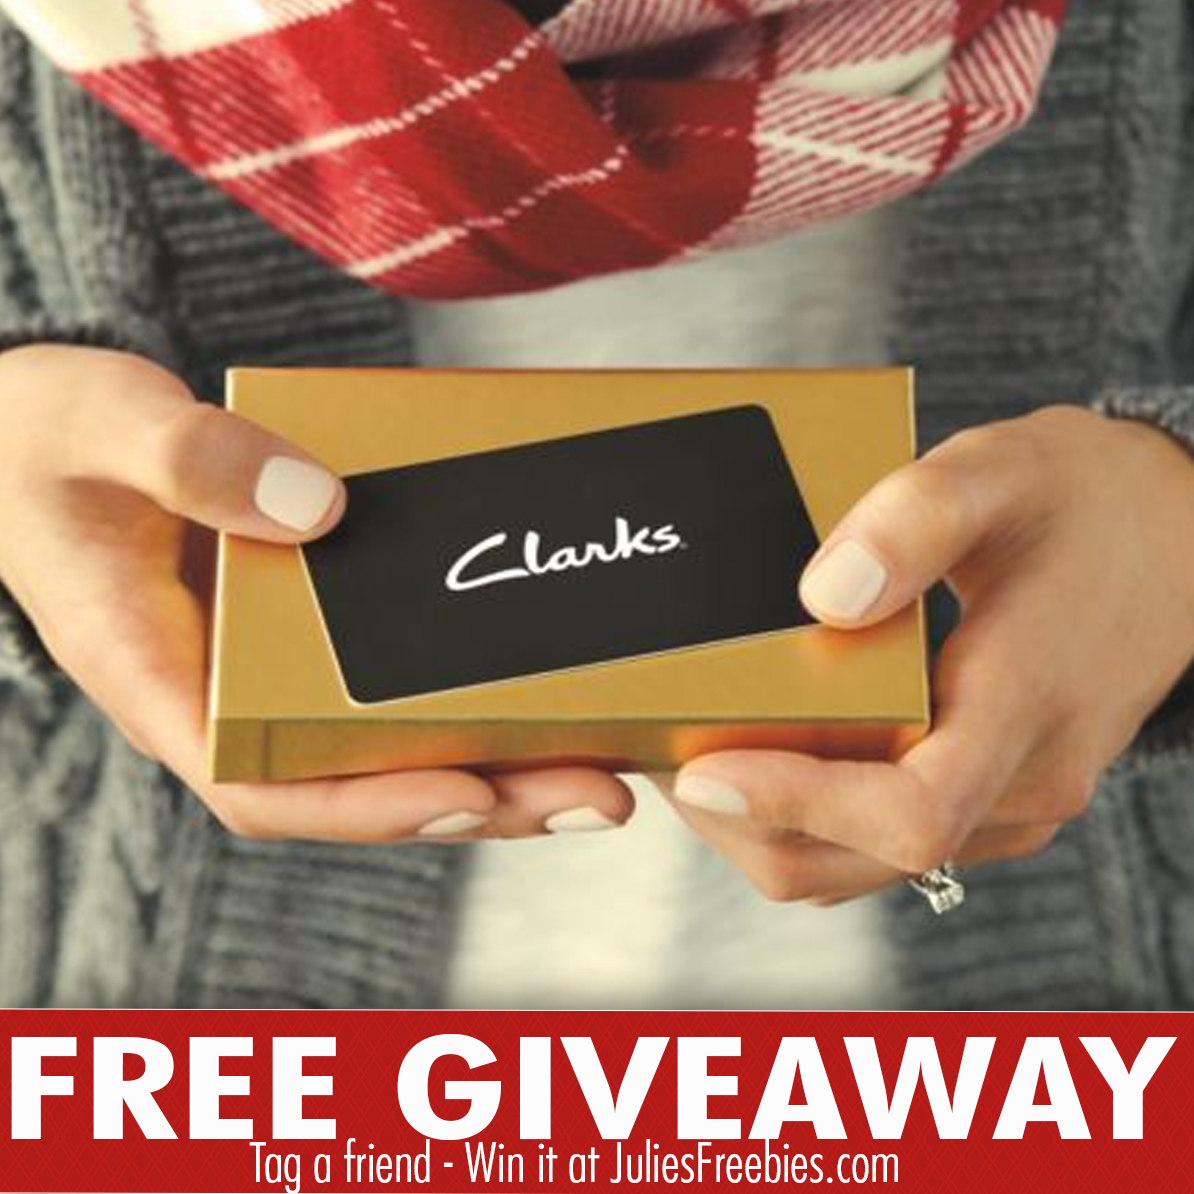 buy clarks gift card with crypto